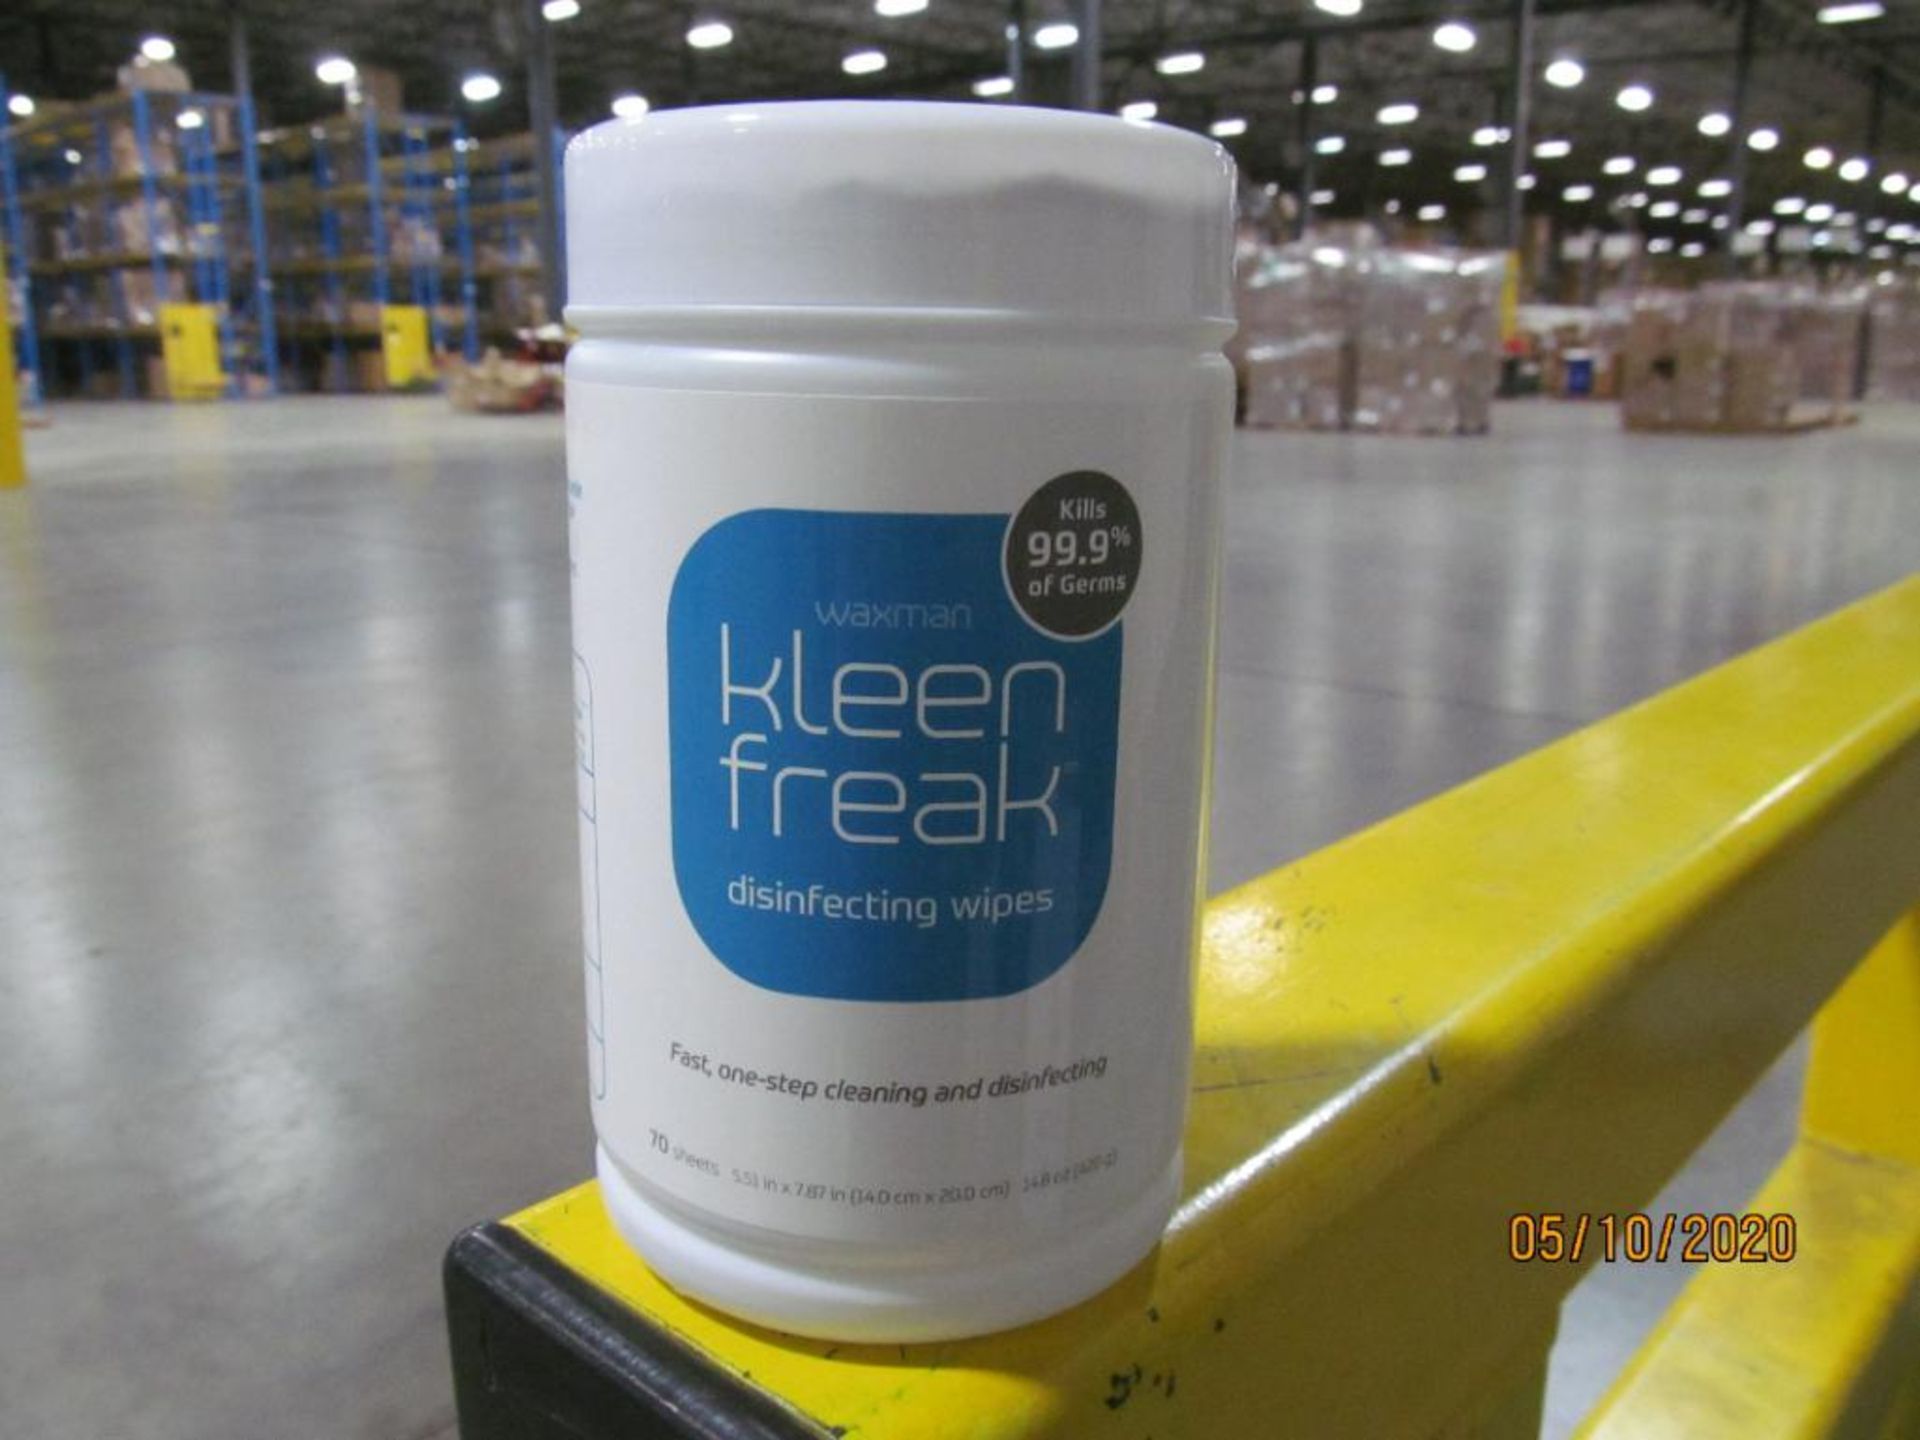 Lot of Waxman Kleen Freak Sanitizing Wipes consisting of 29,027 packages on 45 pallets. Each package